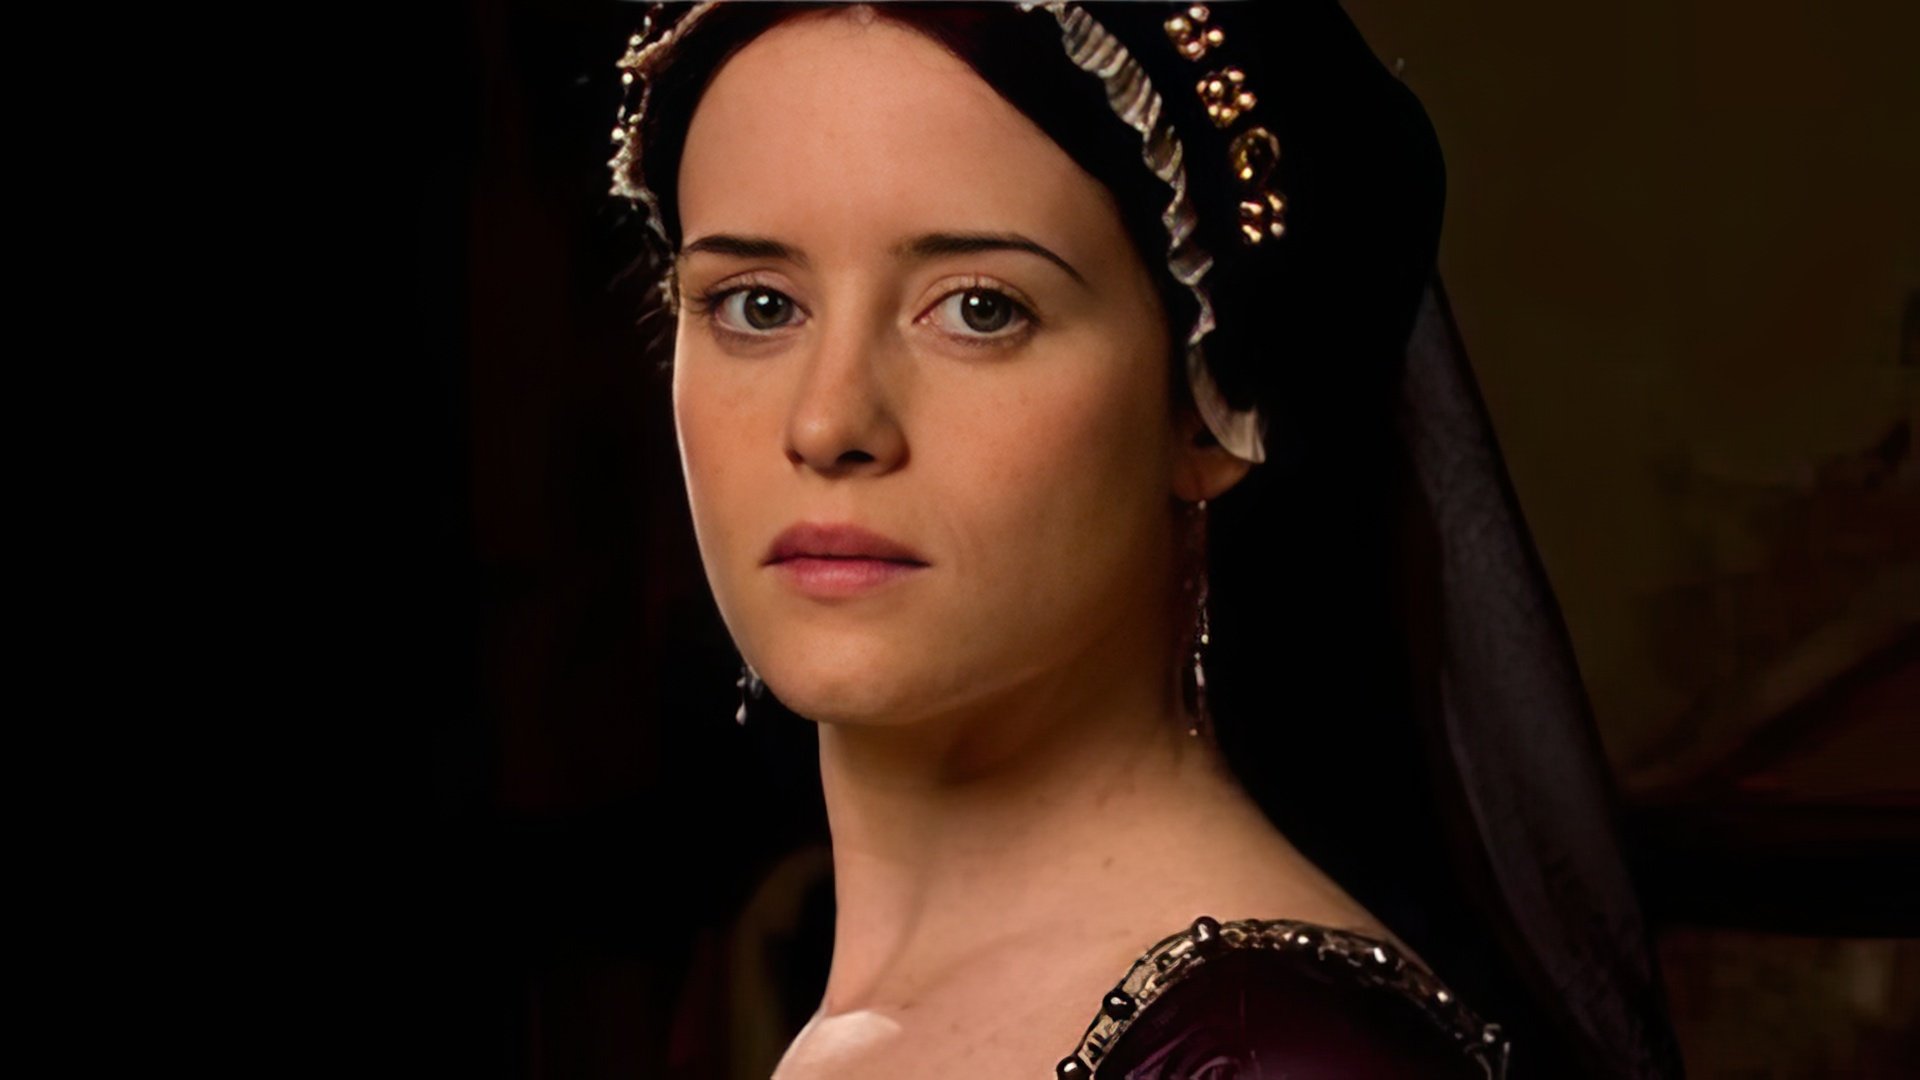 For her role in Wolf Hall, Foy was nominated for a BAFTA award